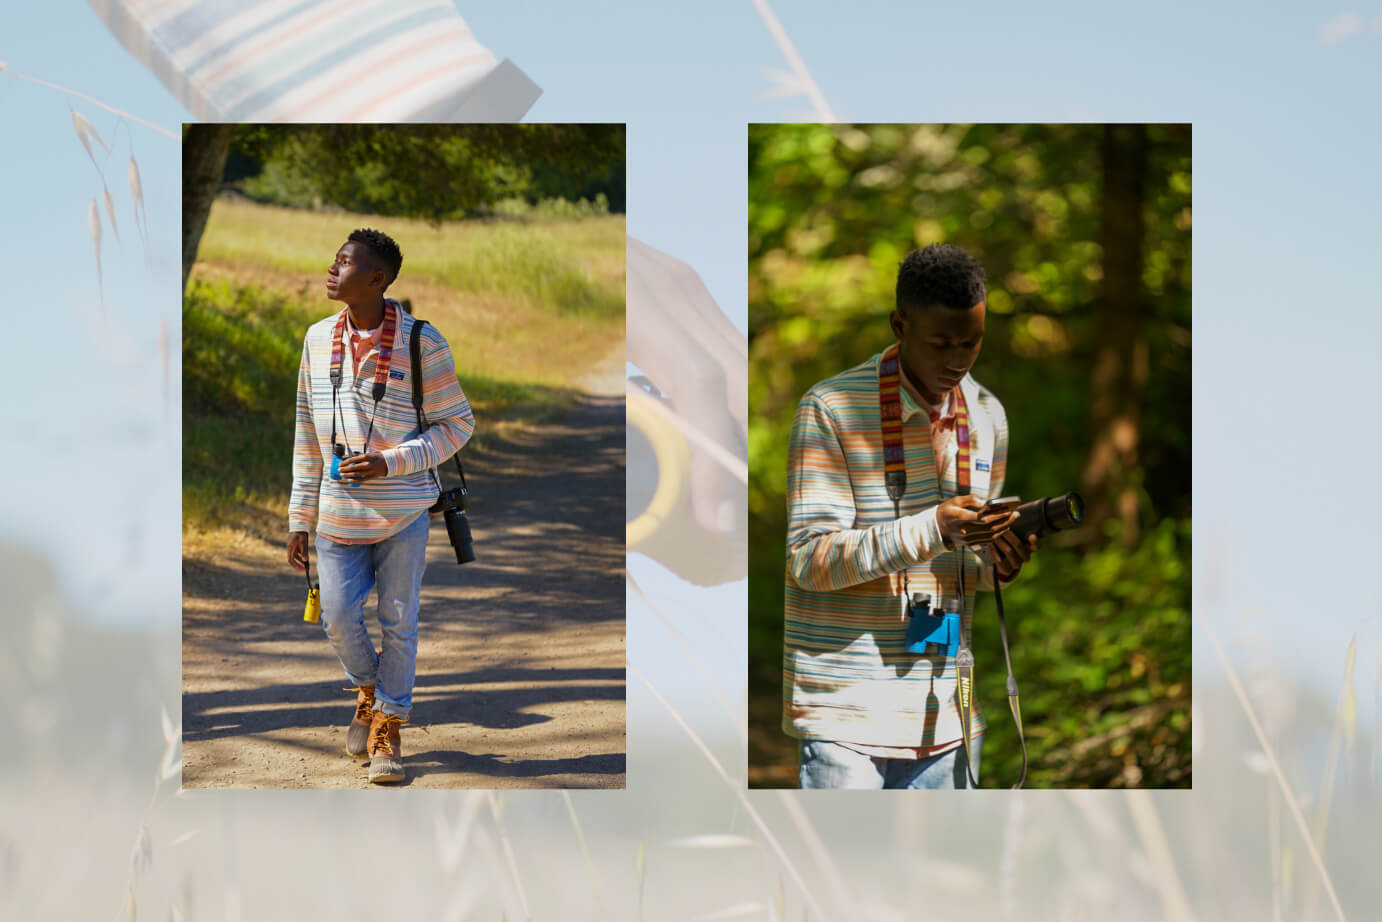 artistic collage picture with two photos of Isaiah Scott, one of him hiking with Nocs around his neck, the other of him using the photo rig to take a picture